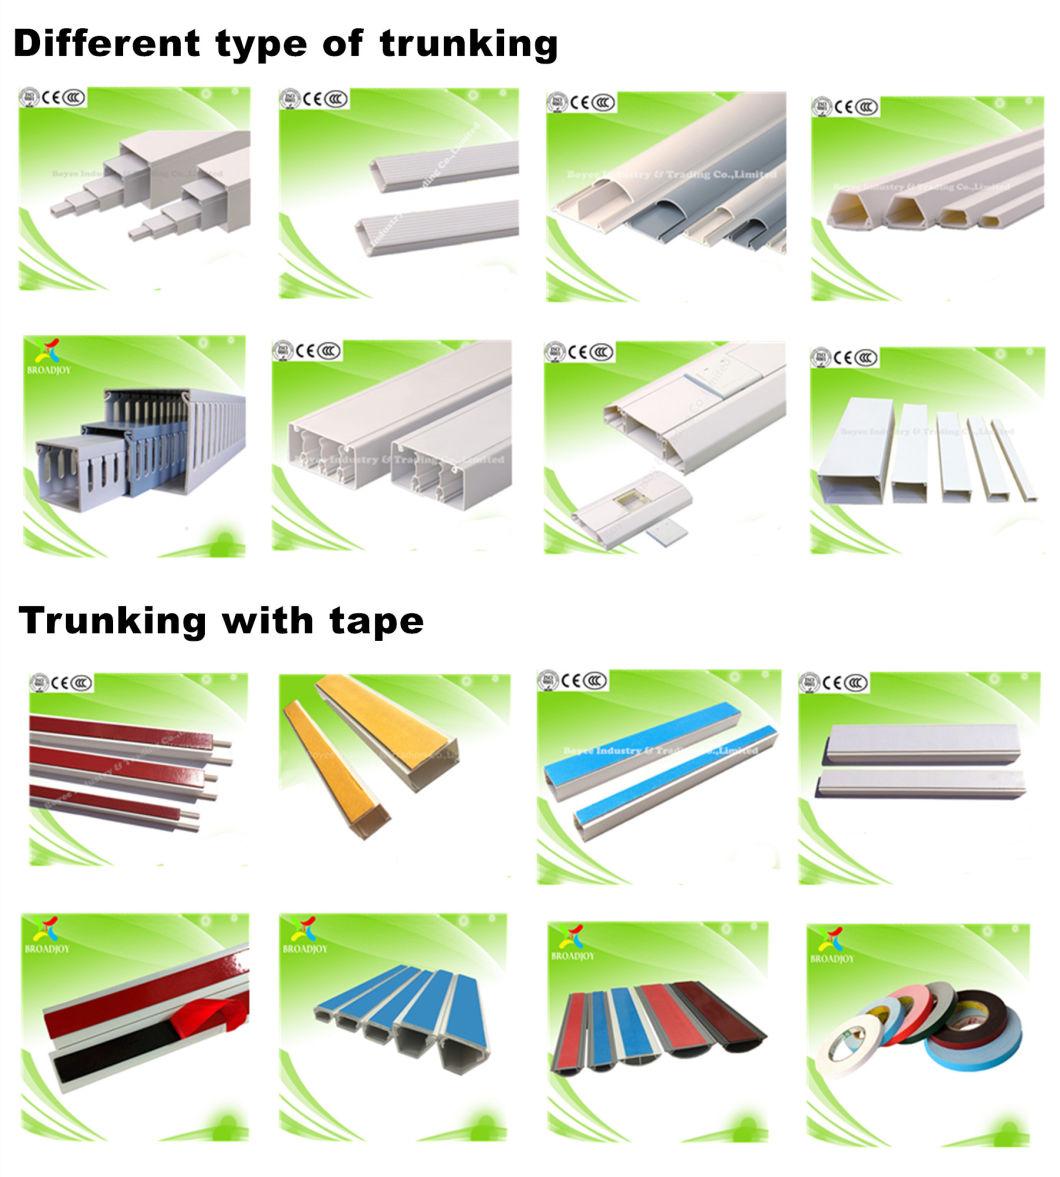 PVC Electrical Wire Cable Trunking